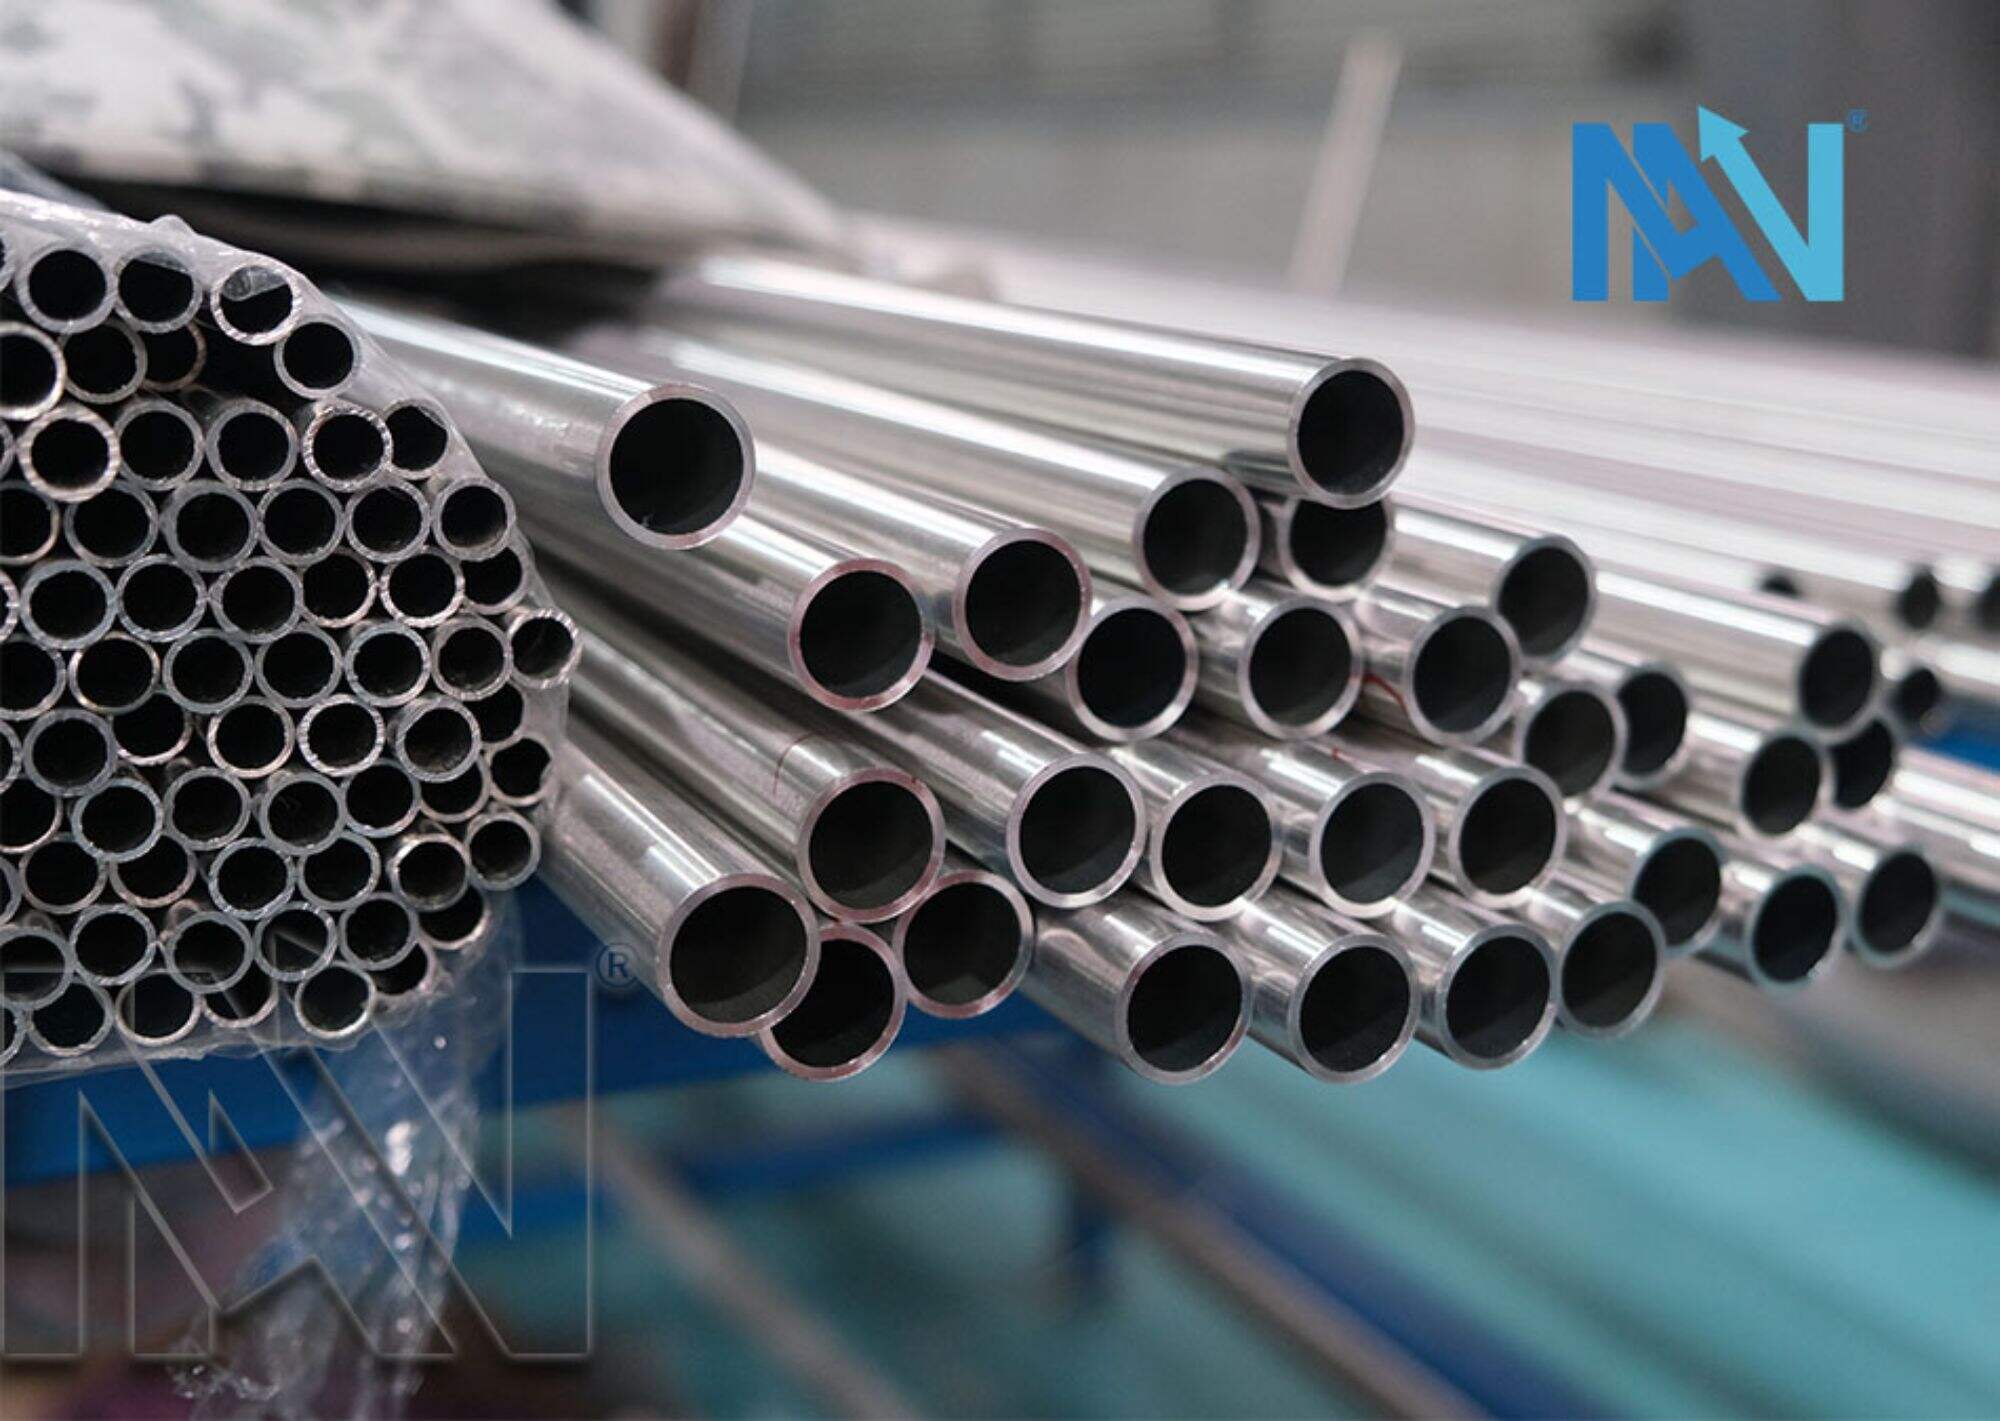 What is austenitic stainless steel， martensitic stainless steel，alloy steel?